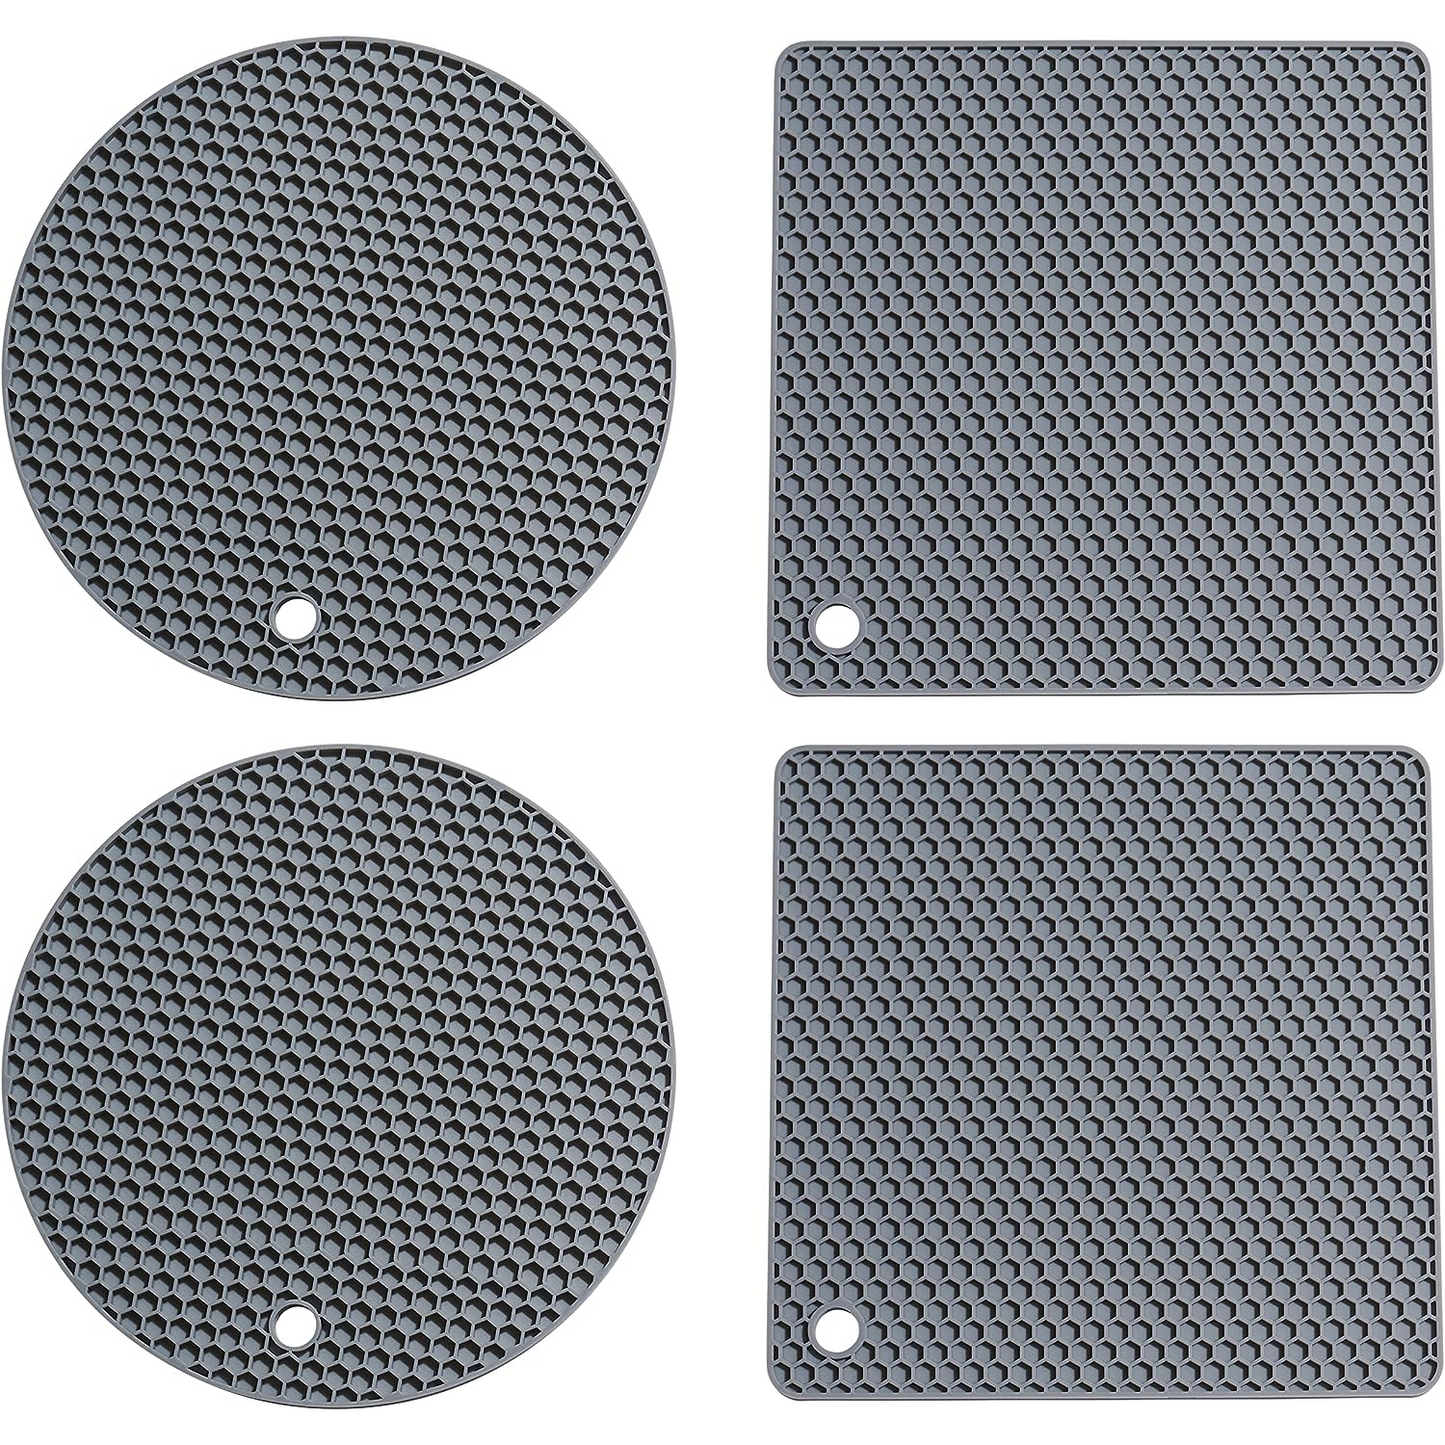 Gourmanity Cook Silicone Trivet Set Heat-Resistant Mats Set of 4 - Gourmanity